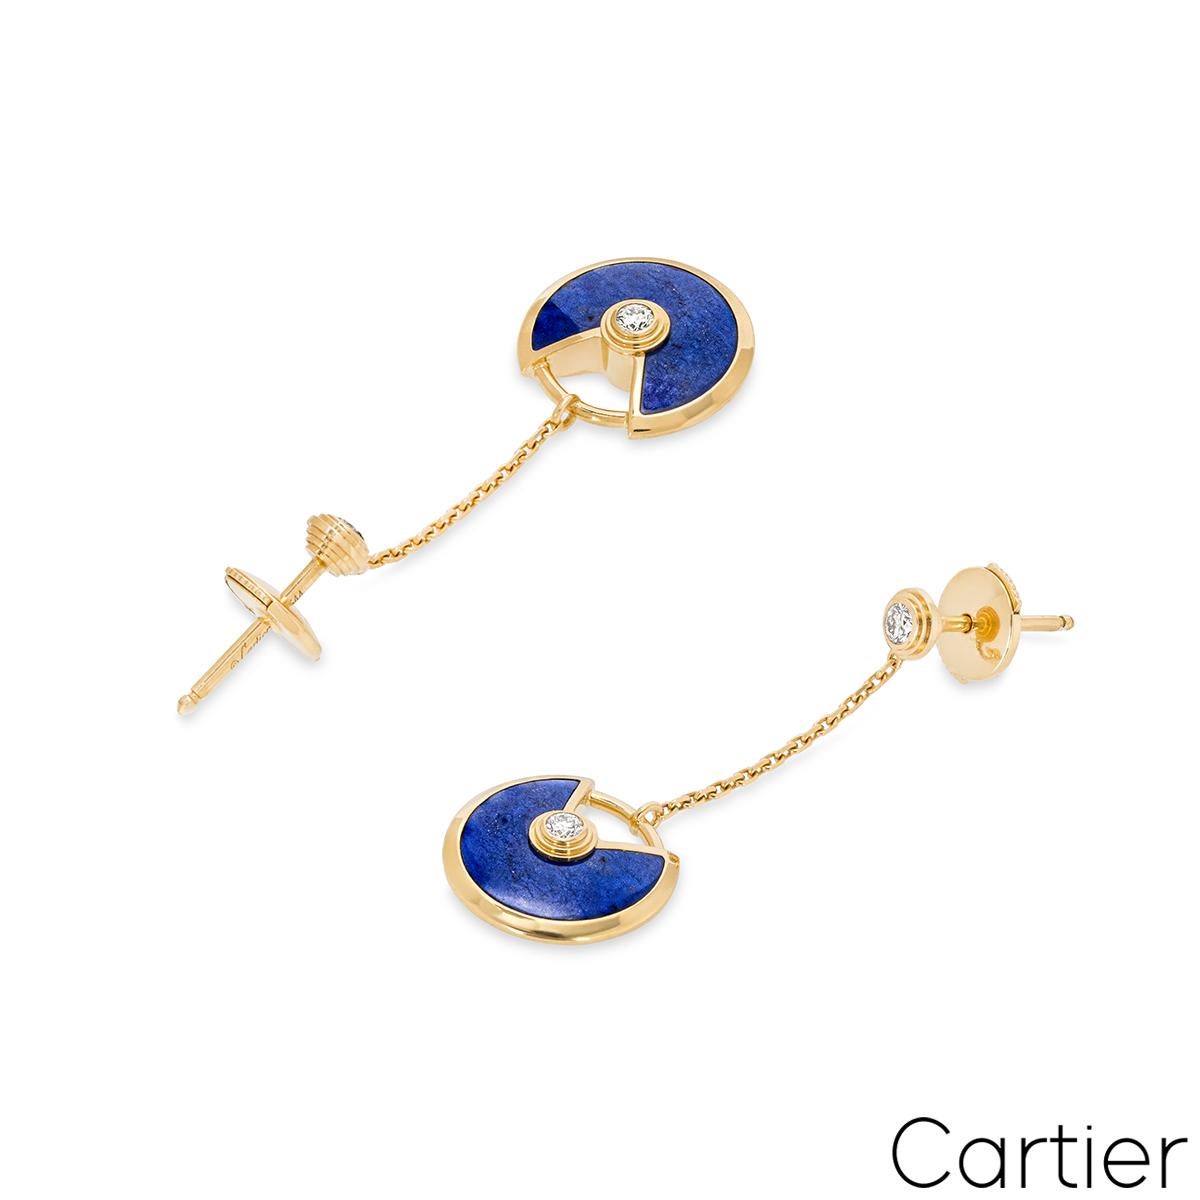 Cartier Yellow Gold Lapis Lazulli & Diamond Amulette de Cartier Earrings B830123 In Excellent Condition For Sale In London, GB